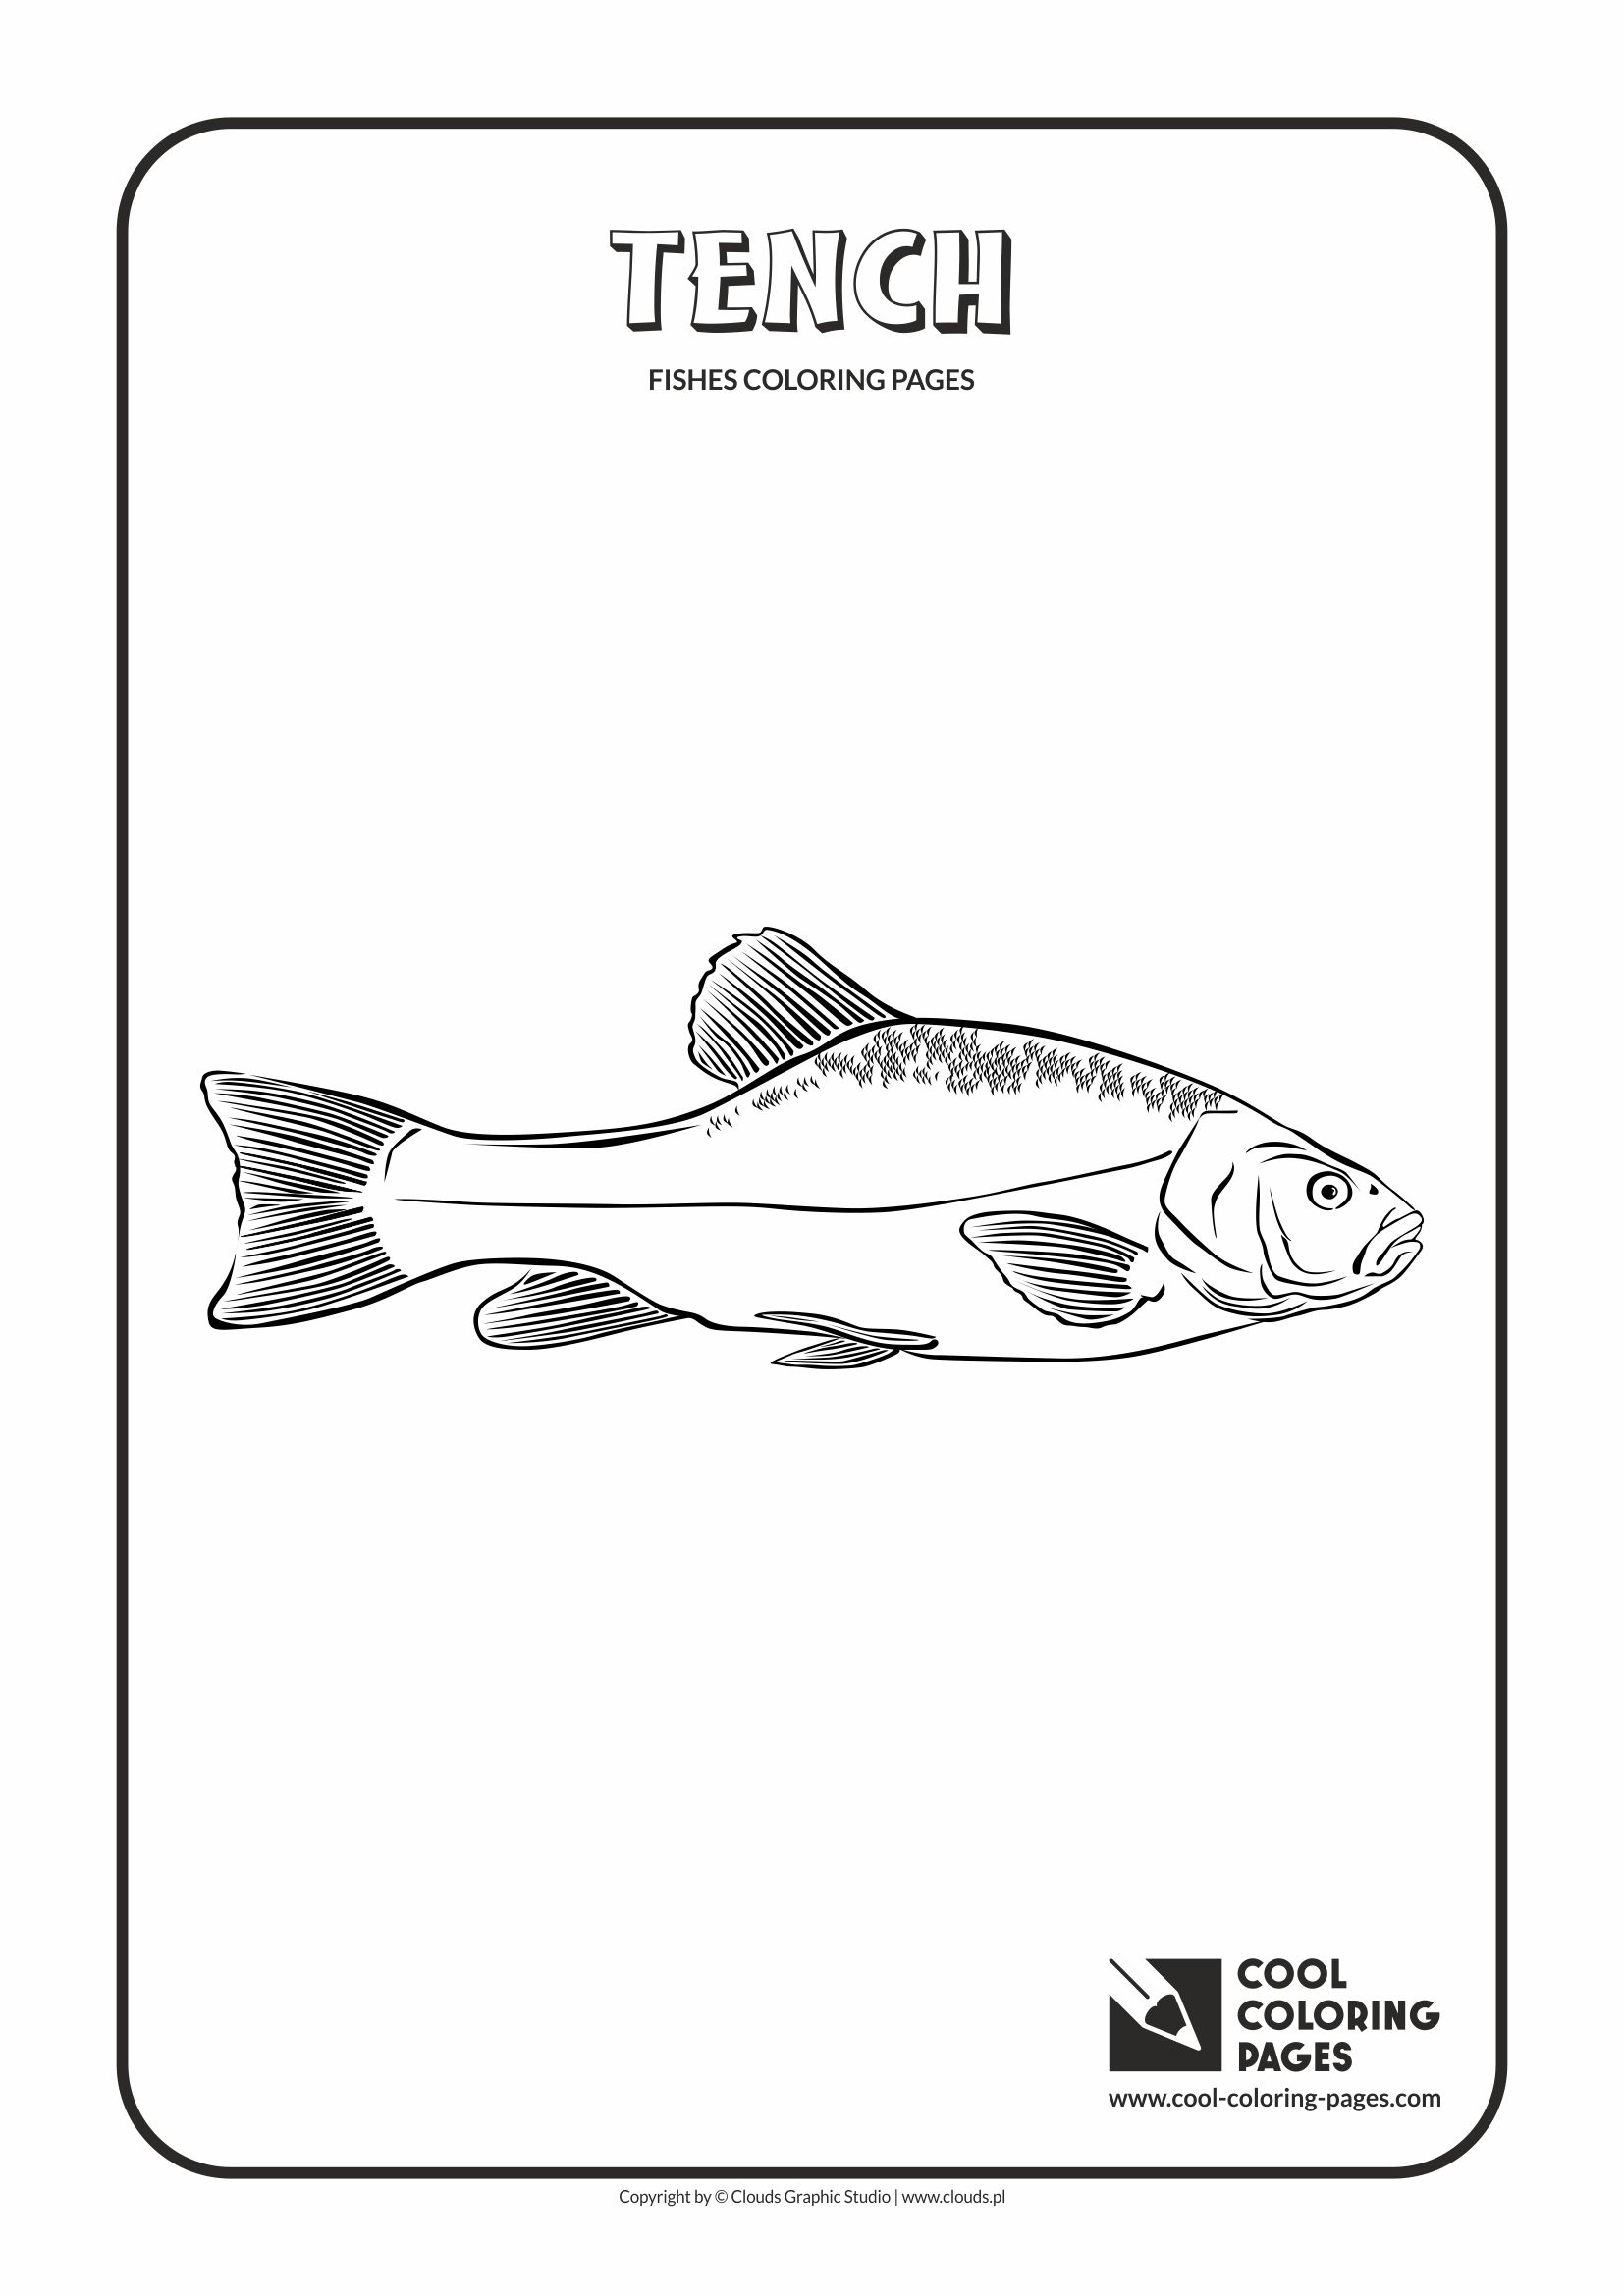 Cool Coloring Pages - Animals / Tench / Coloring page with tench